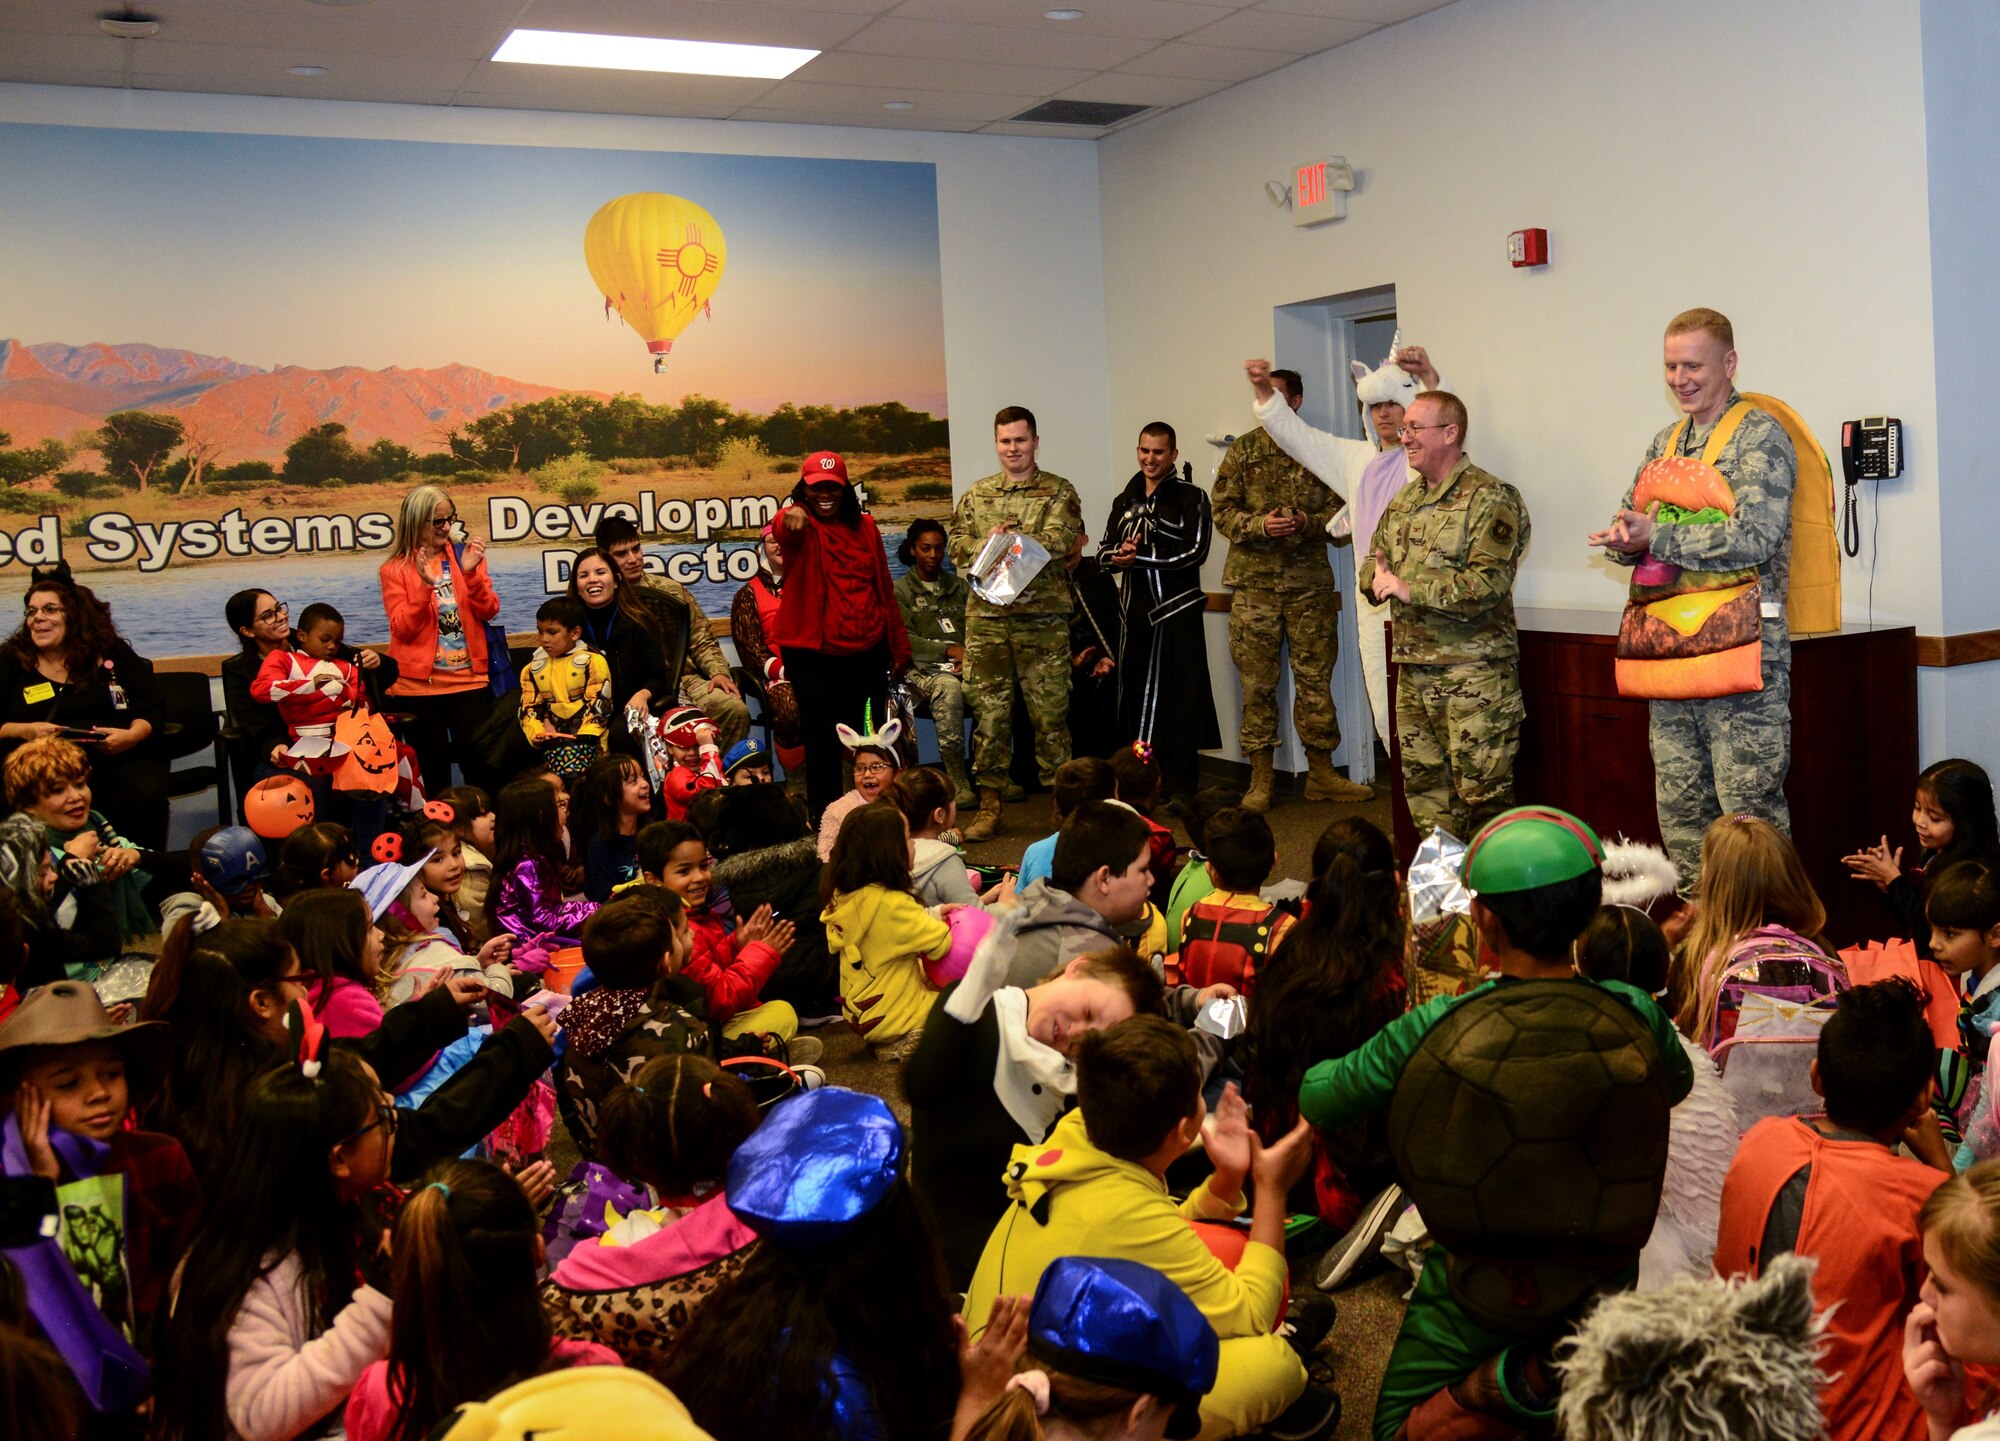 Kirtland Elementary School students and teachers listen to a briefing from members of the Space and Missiles Systems Center (SMC) on Kirtland Air Force Base, N.M., Oct. 31, 2019. Each year, SMC invites the school to their Haunted Halloween event in which the entire building is filled with spooky decorations and hundreds of pounds of candy are passed out to costumed visitors.